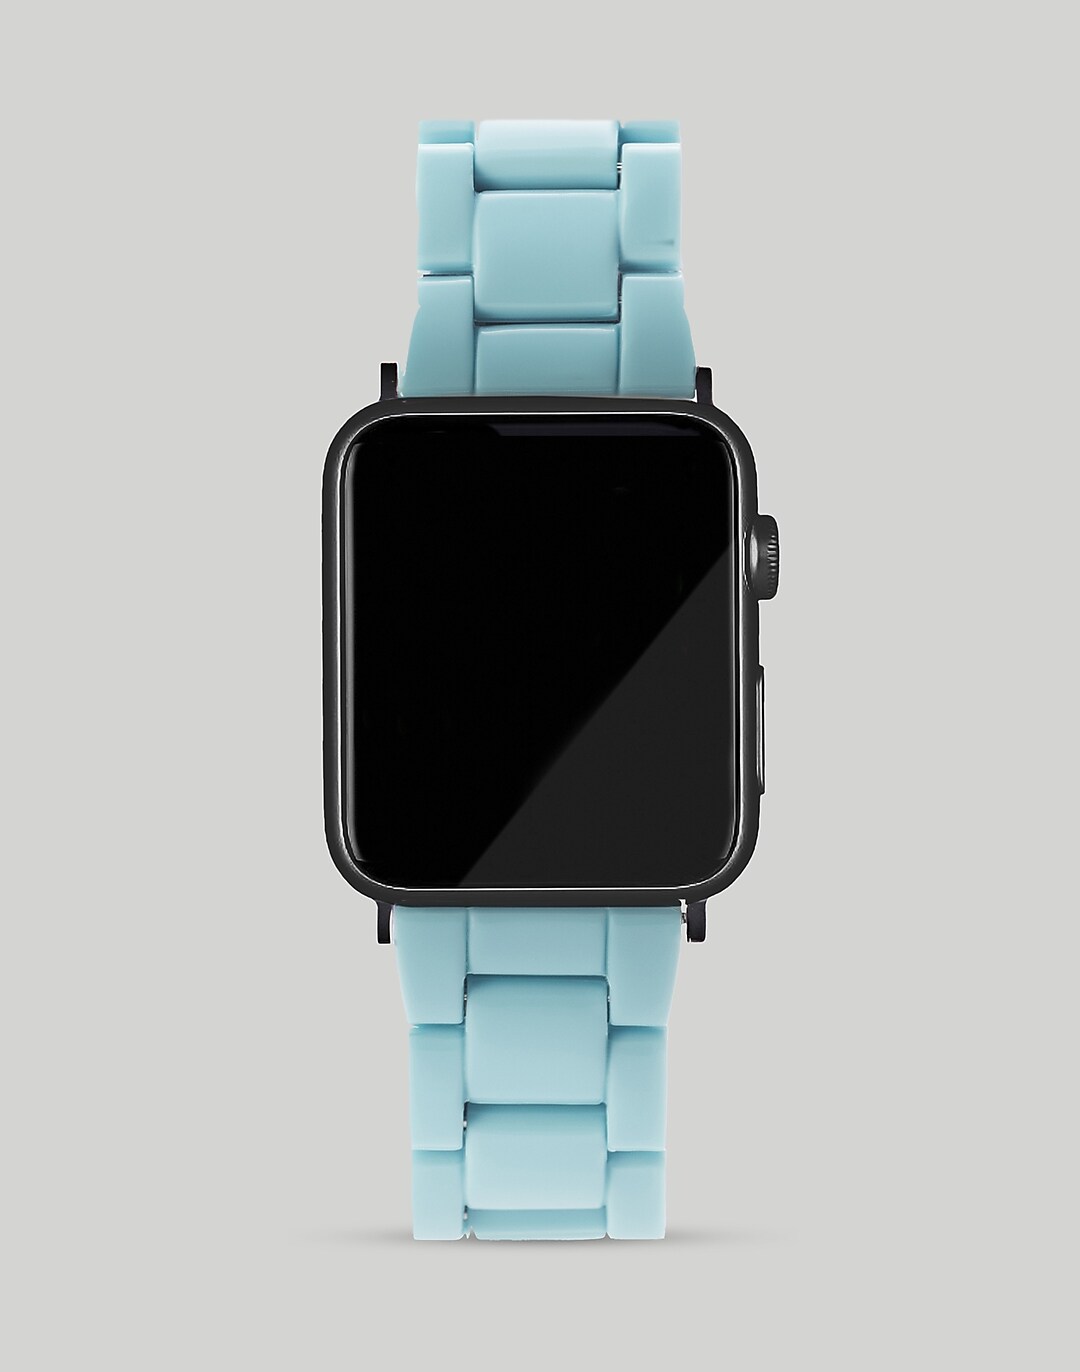 MikesTreasuresCrafts - Luxury Apple Watch Bands and More Crafts